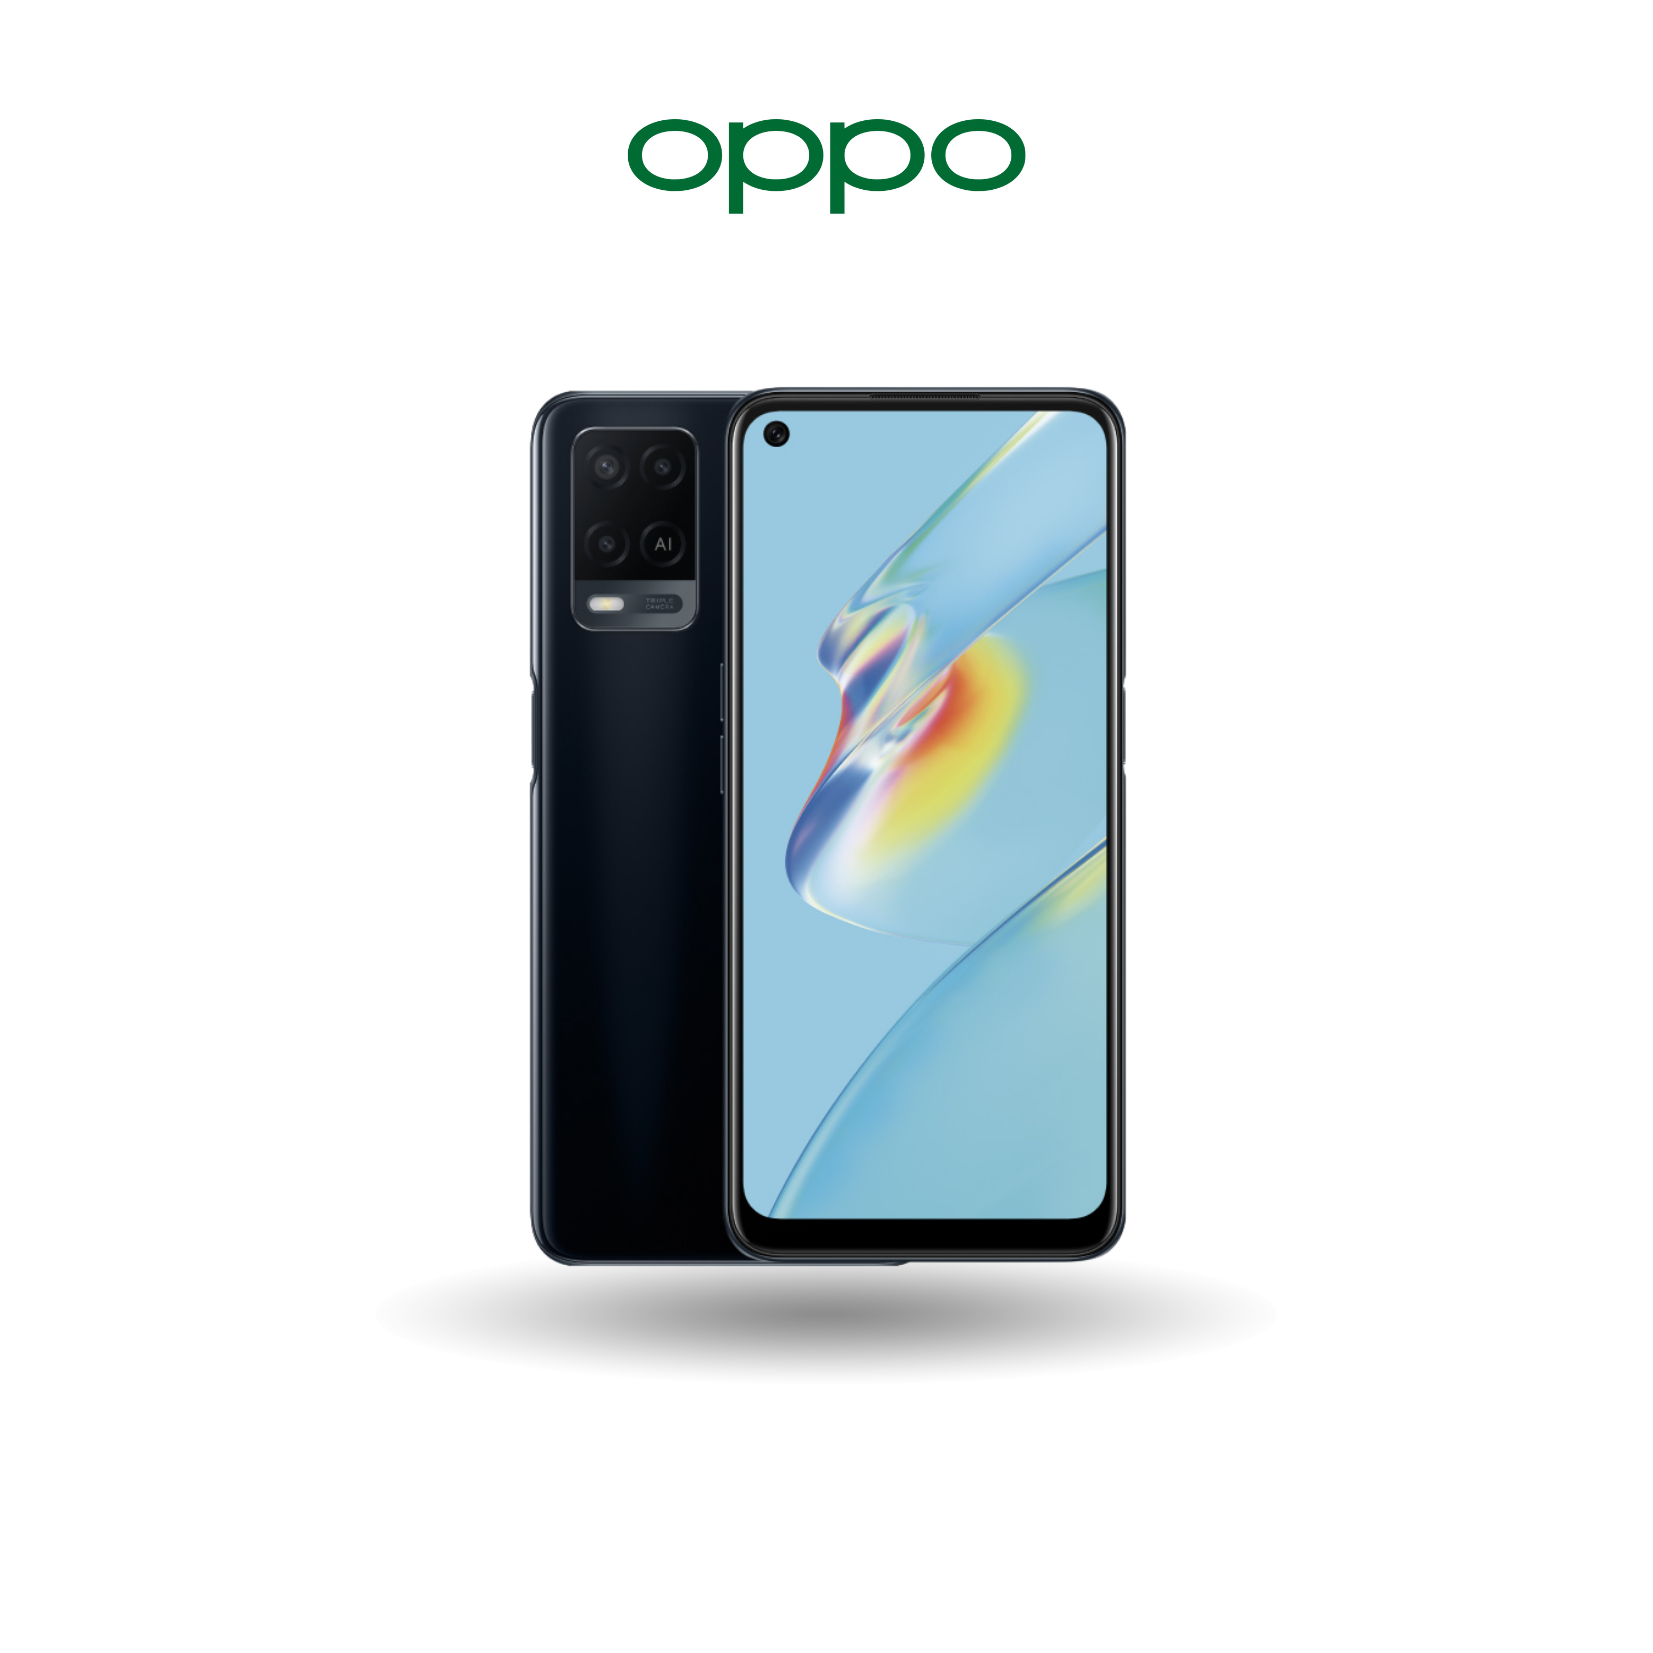 Oppo A54 (128GB) - Eye-Care Punch-Hole Display | 16MP Selfie Camera | 18W Fast Charge